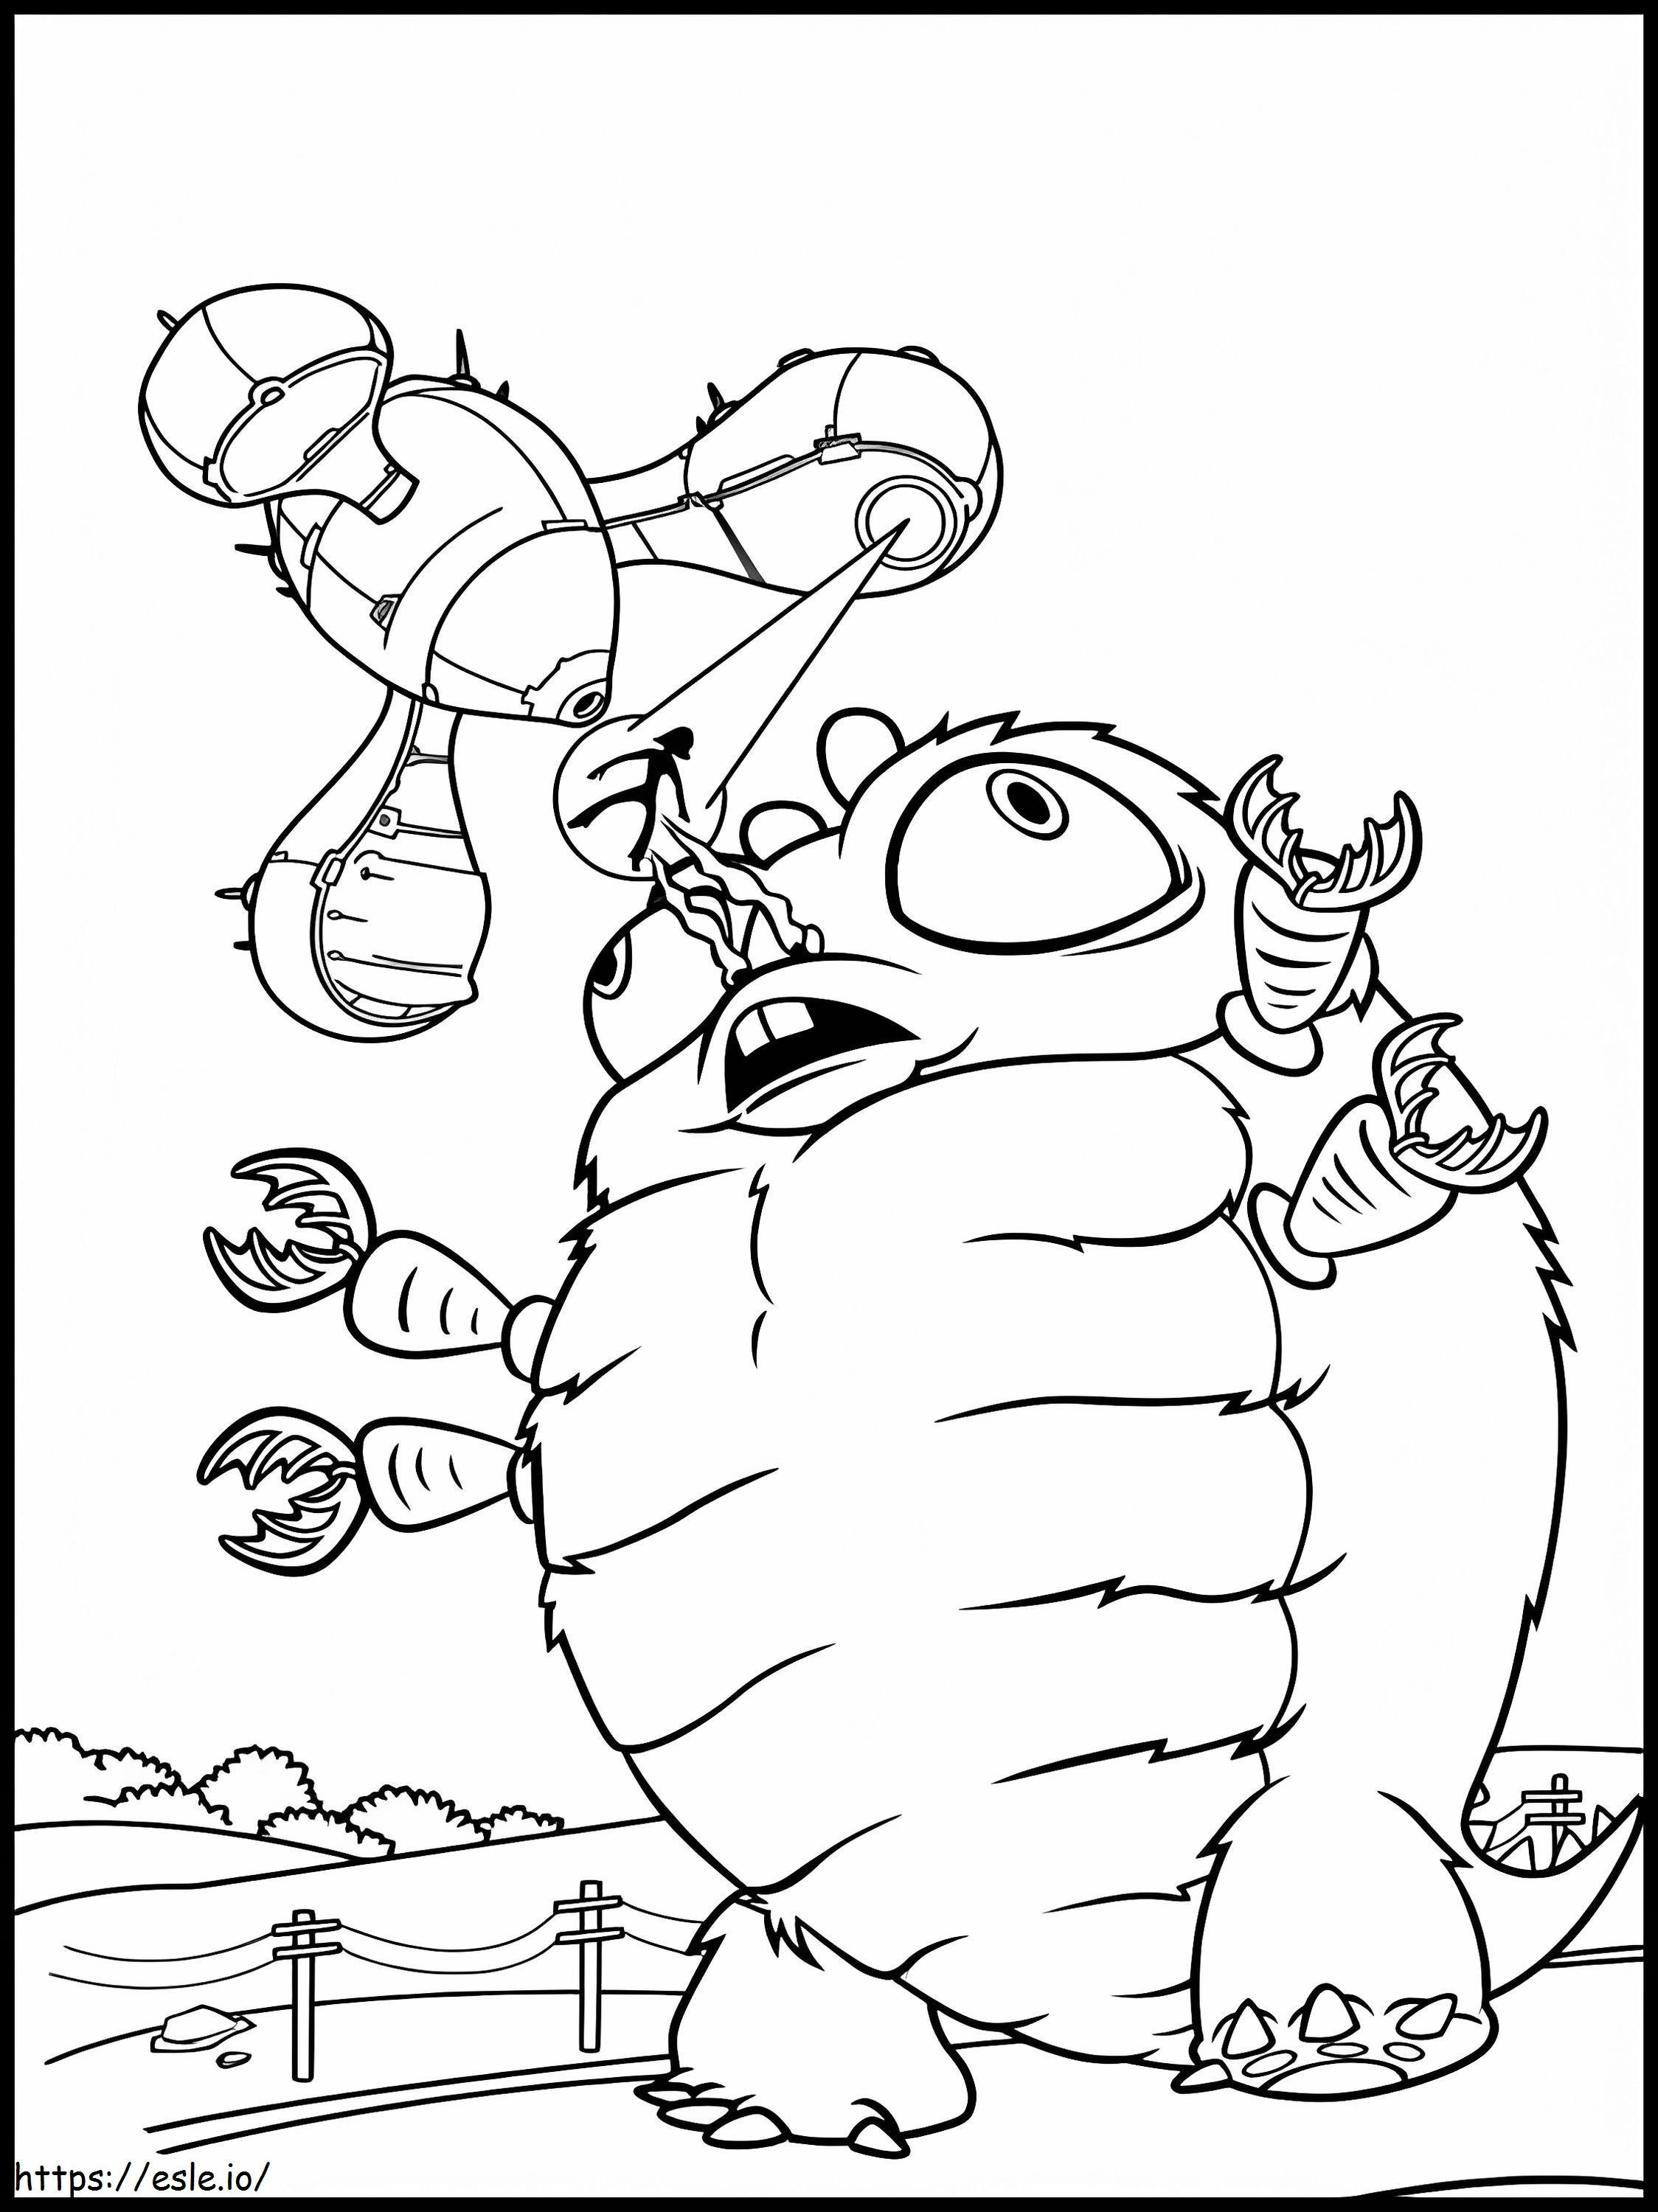 Printable Monsters Vs Aliens coloring page